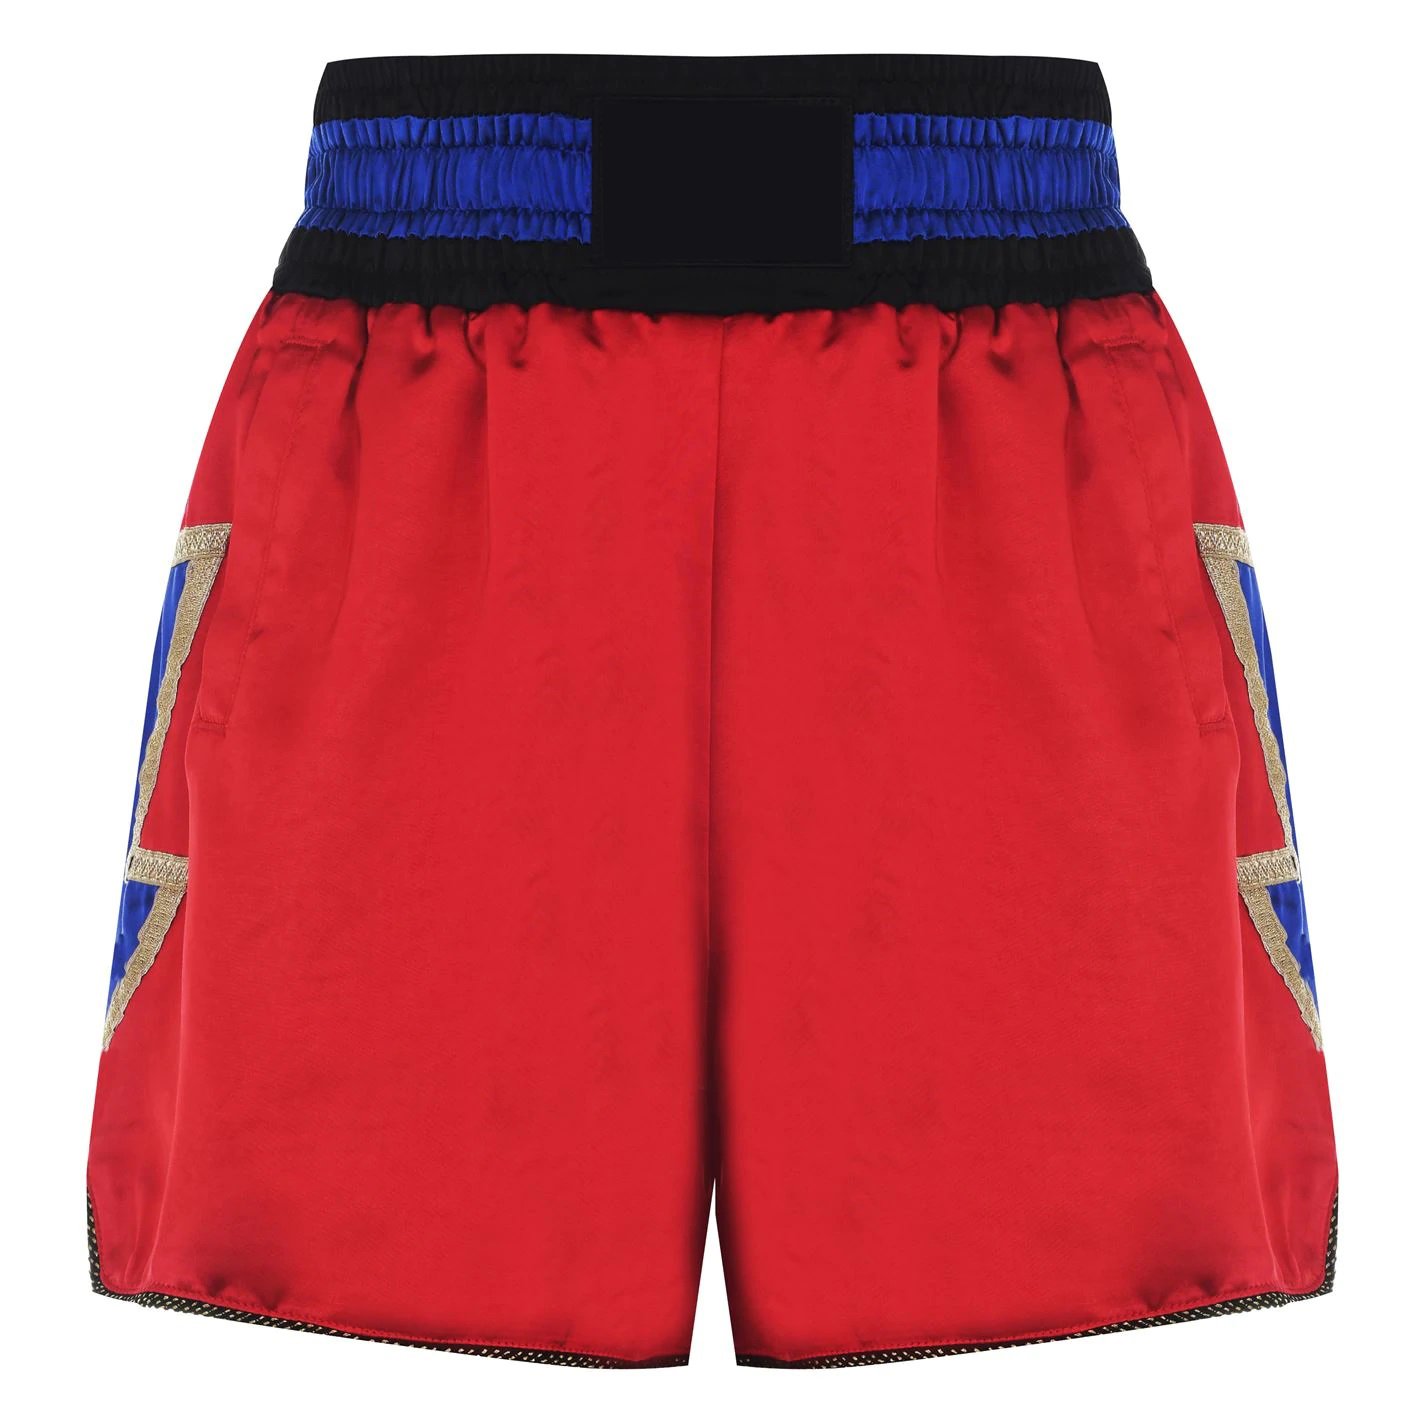 Best Sublimated Boxing Shorts - Timber Sports